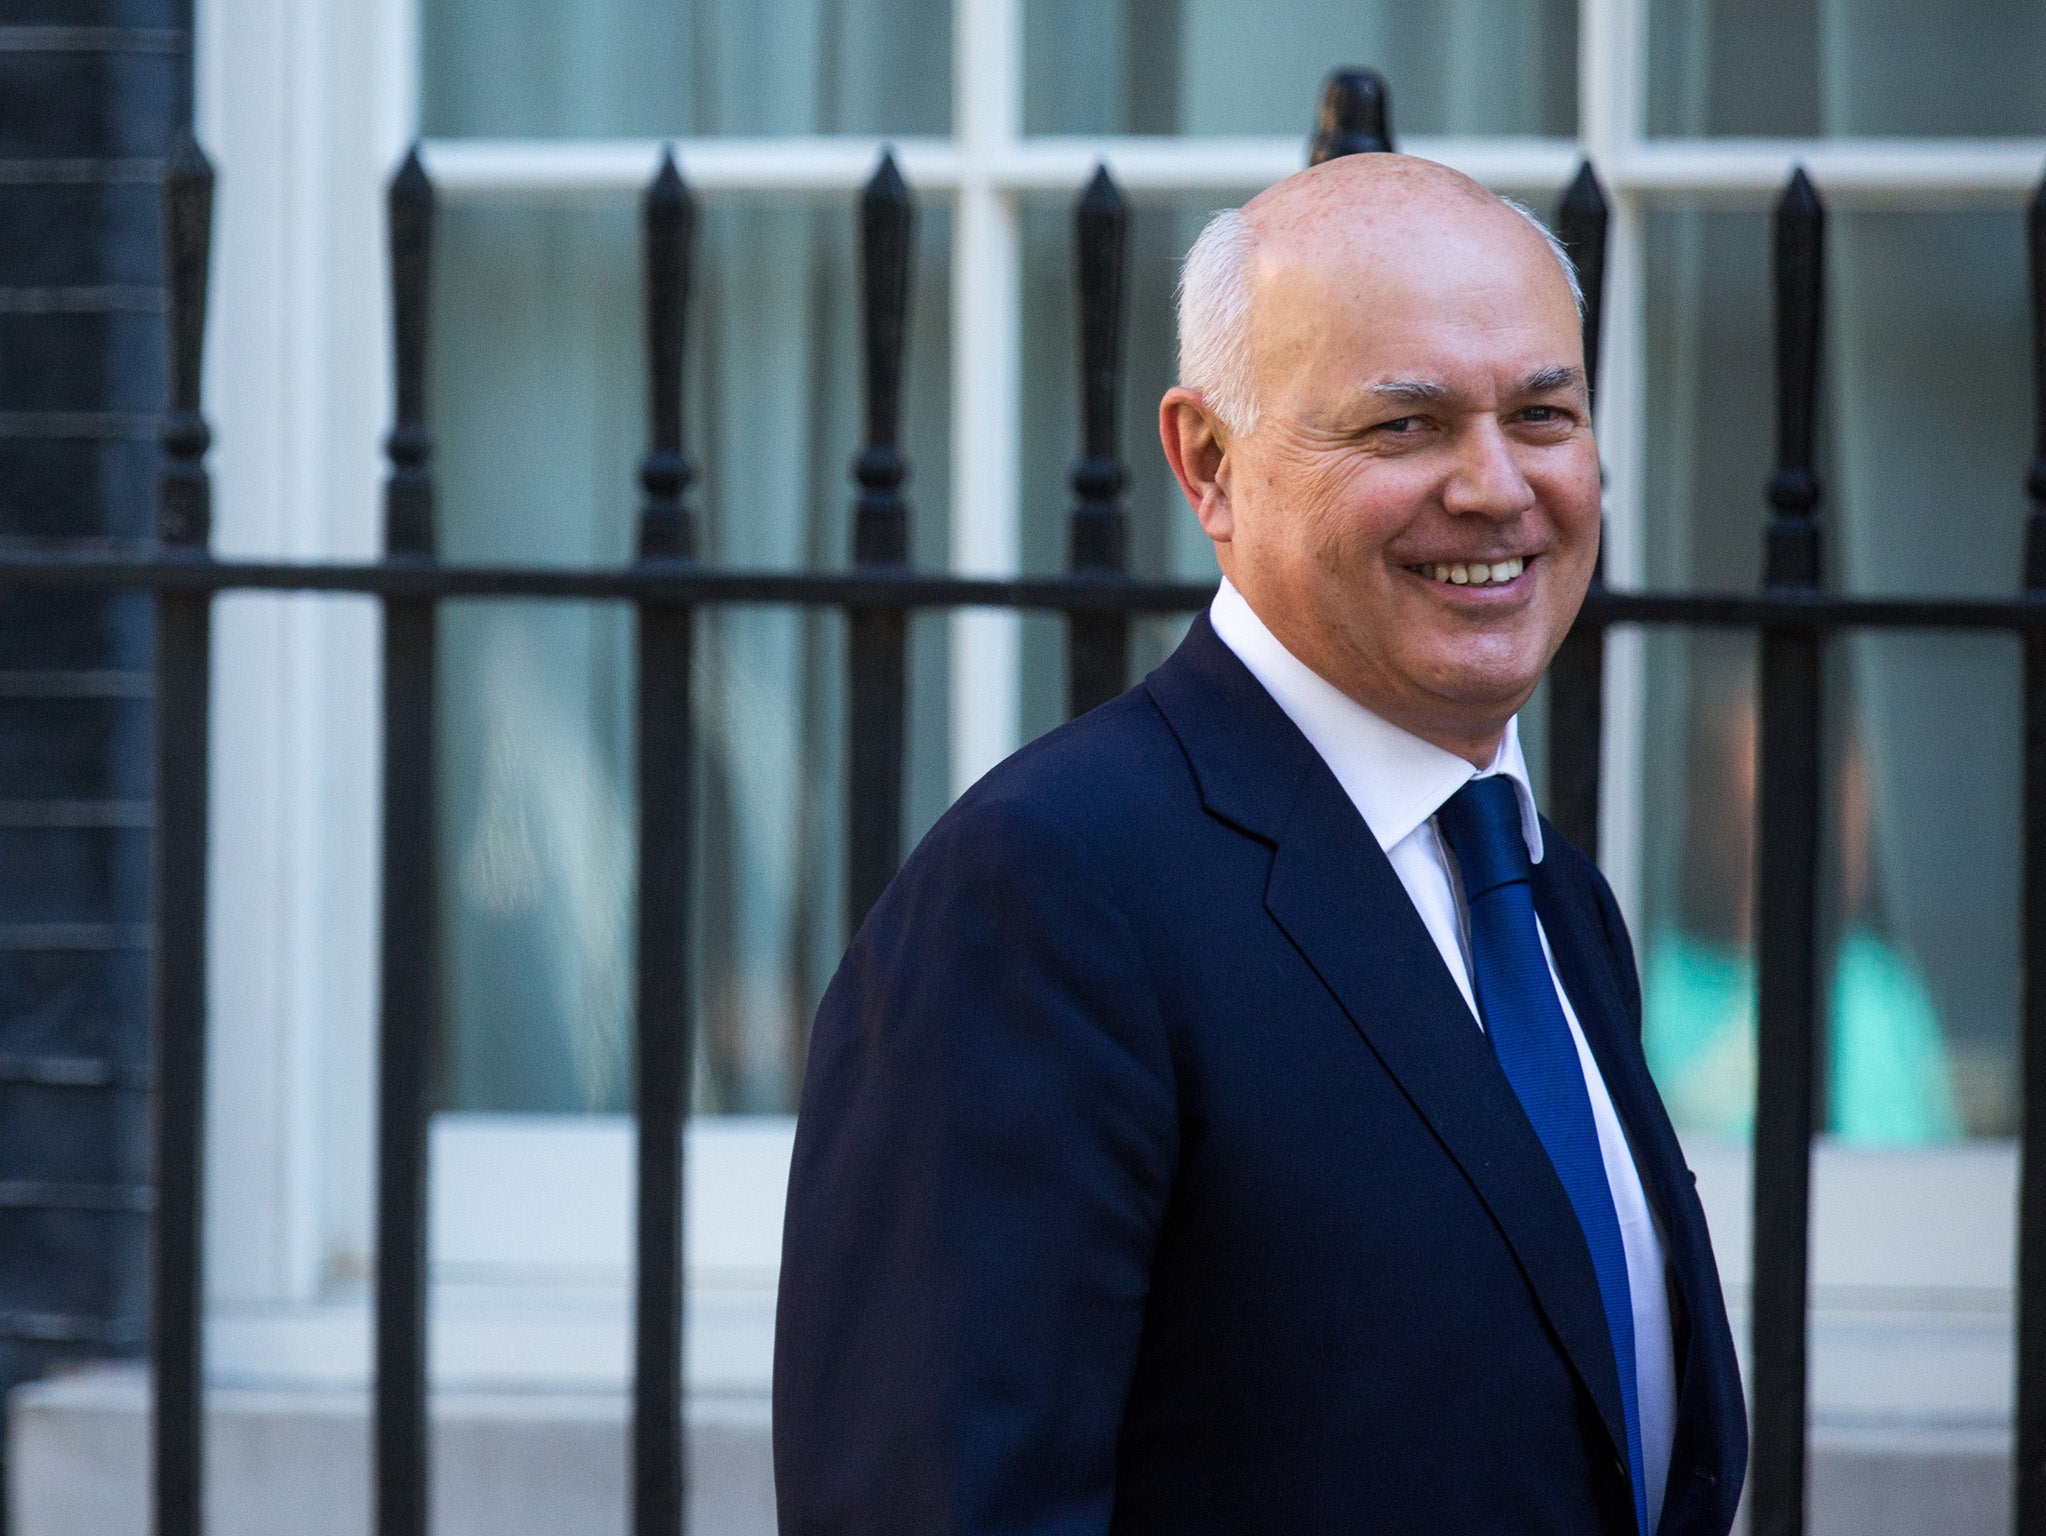 Mr Duncan Smith said Ms Mourdant was talking about the British people not having a vote on Turkey-EU deal